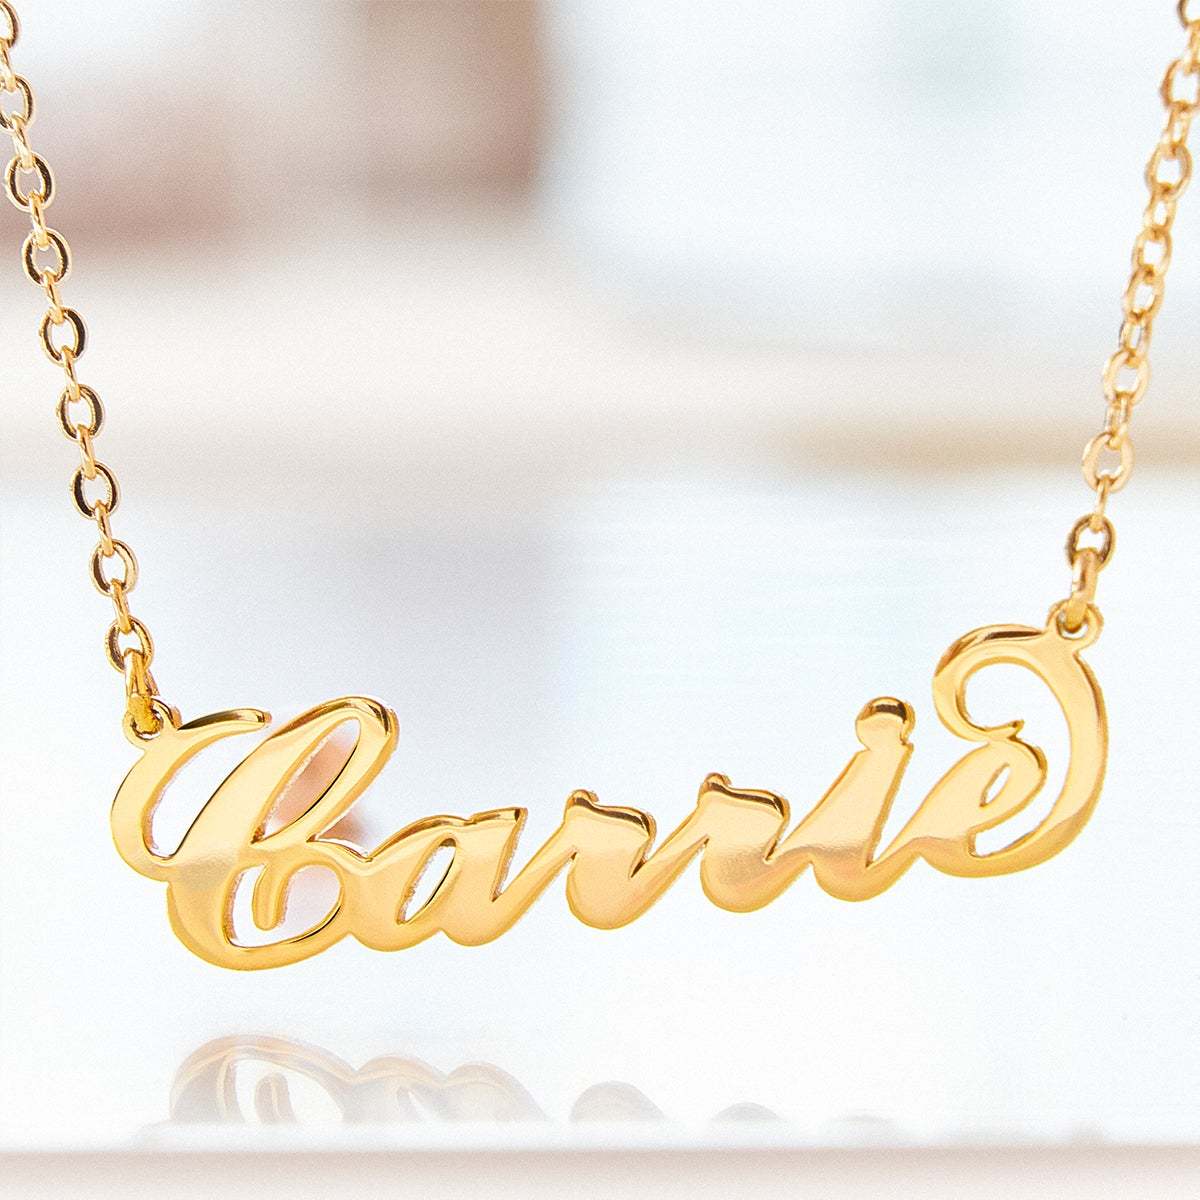 Soufeel Gold "Carrie" Style Name Necklace Christmas Gifts